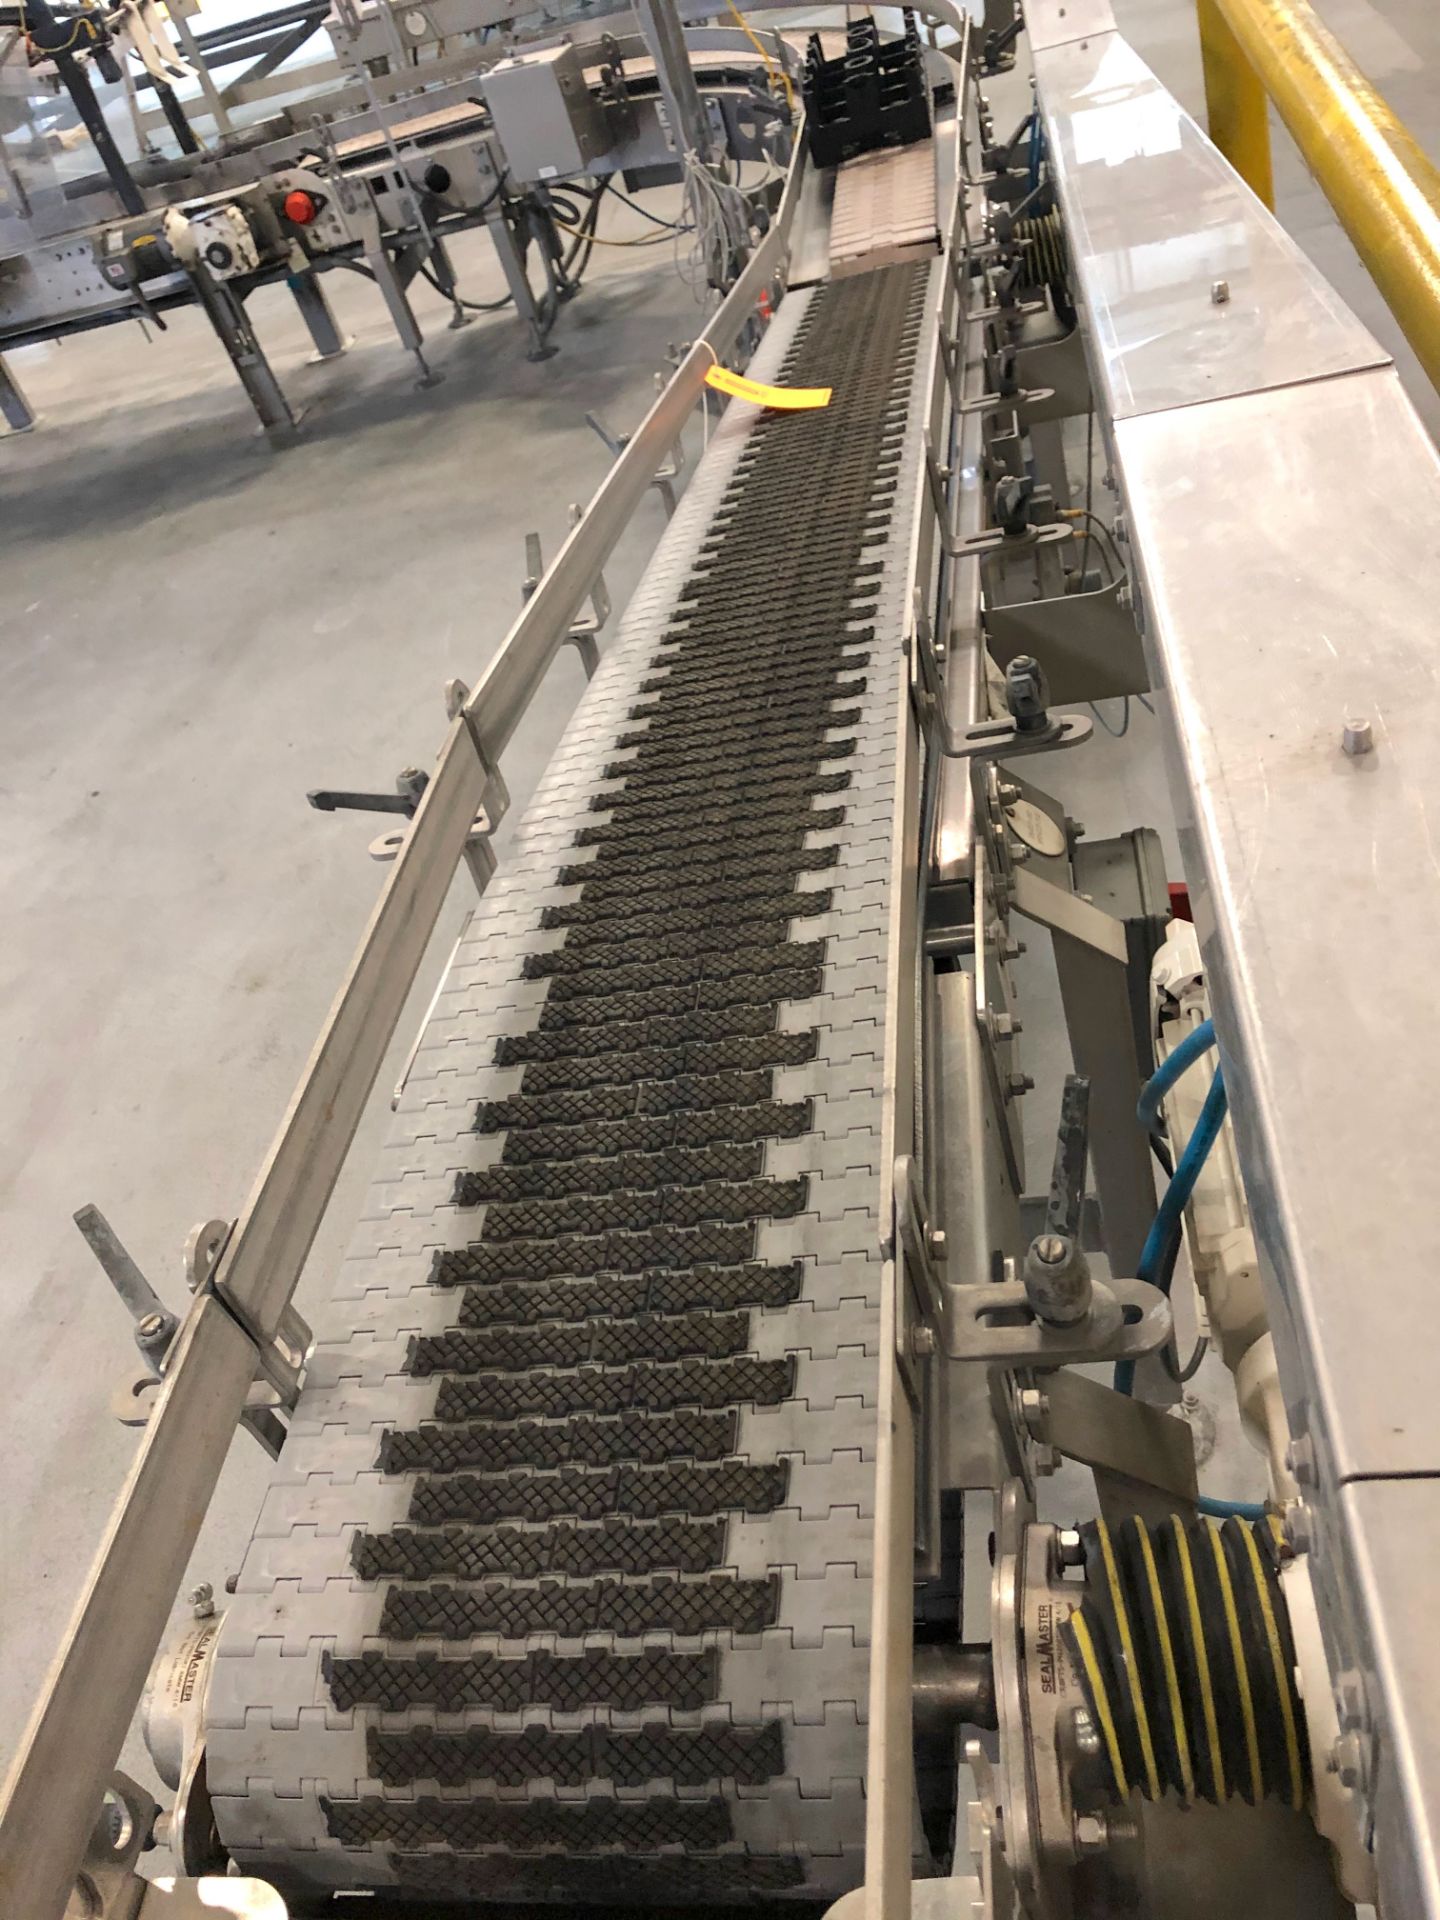 Alliance 9 foot long case conveyor section after packer - Image 2 of 4